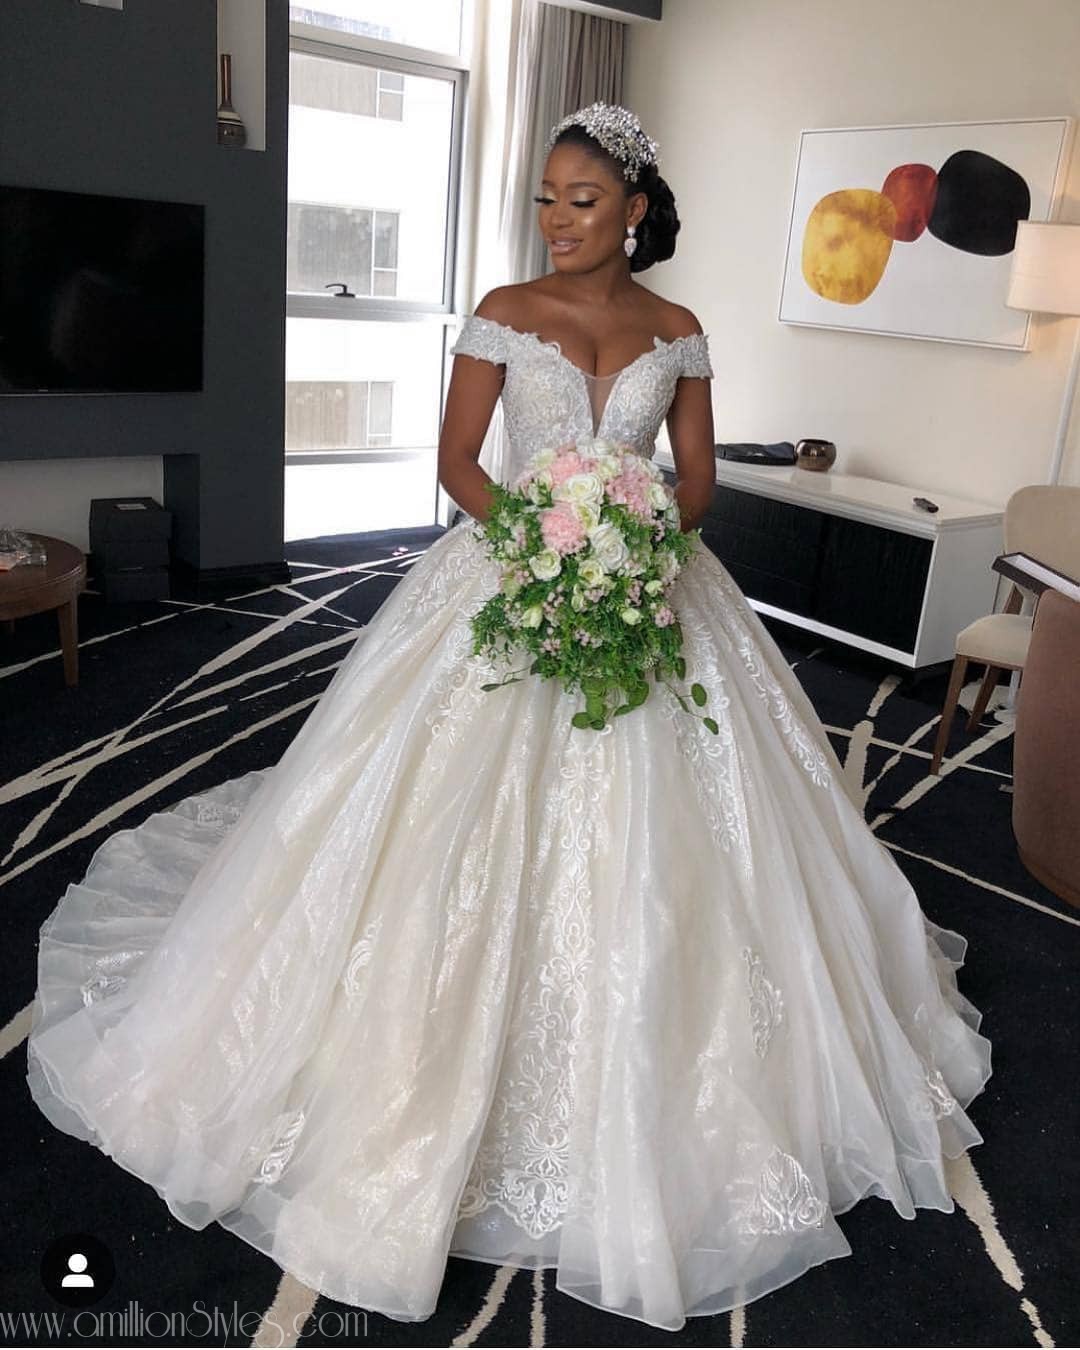 These Unique Wedding Gowns Are Fabulous!